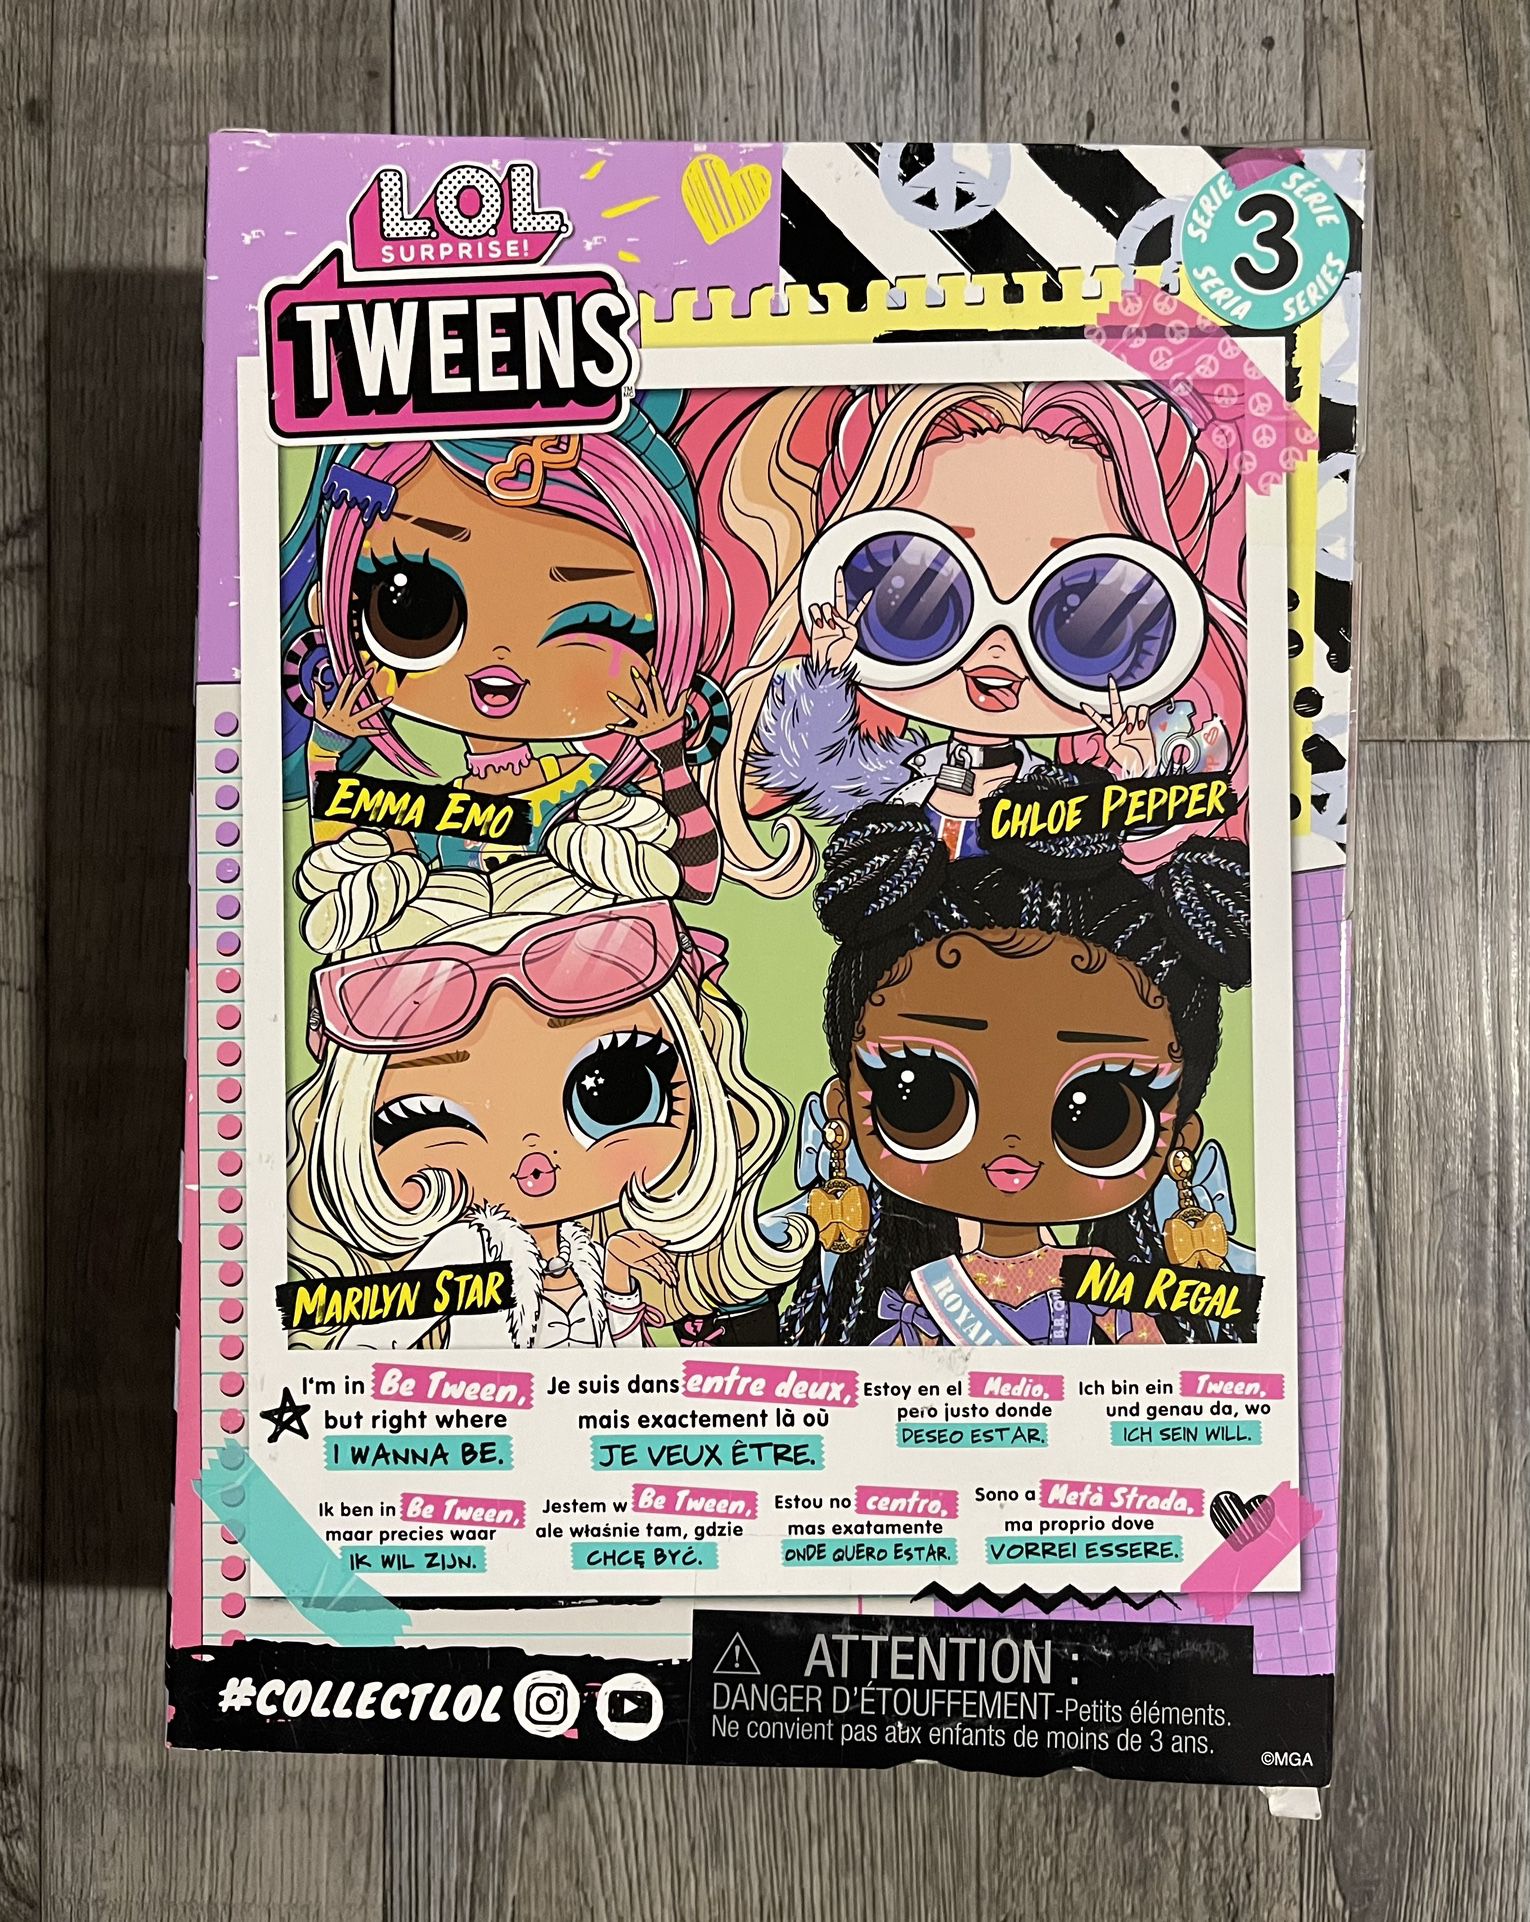 LOL Surprise Tweens Series 3 Chloe Pepper Fashion Doll with 15 Surprises Including Accessories for Play & Style 